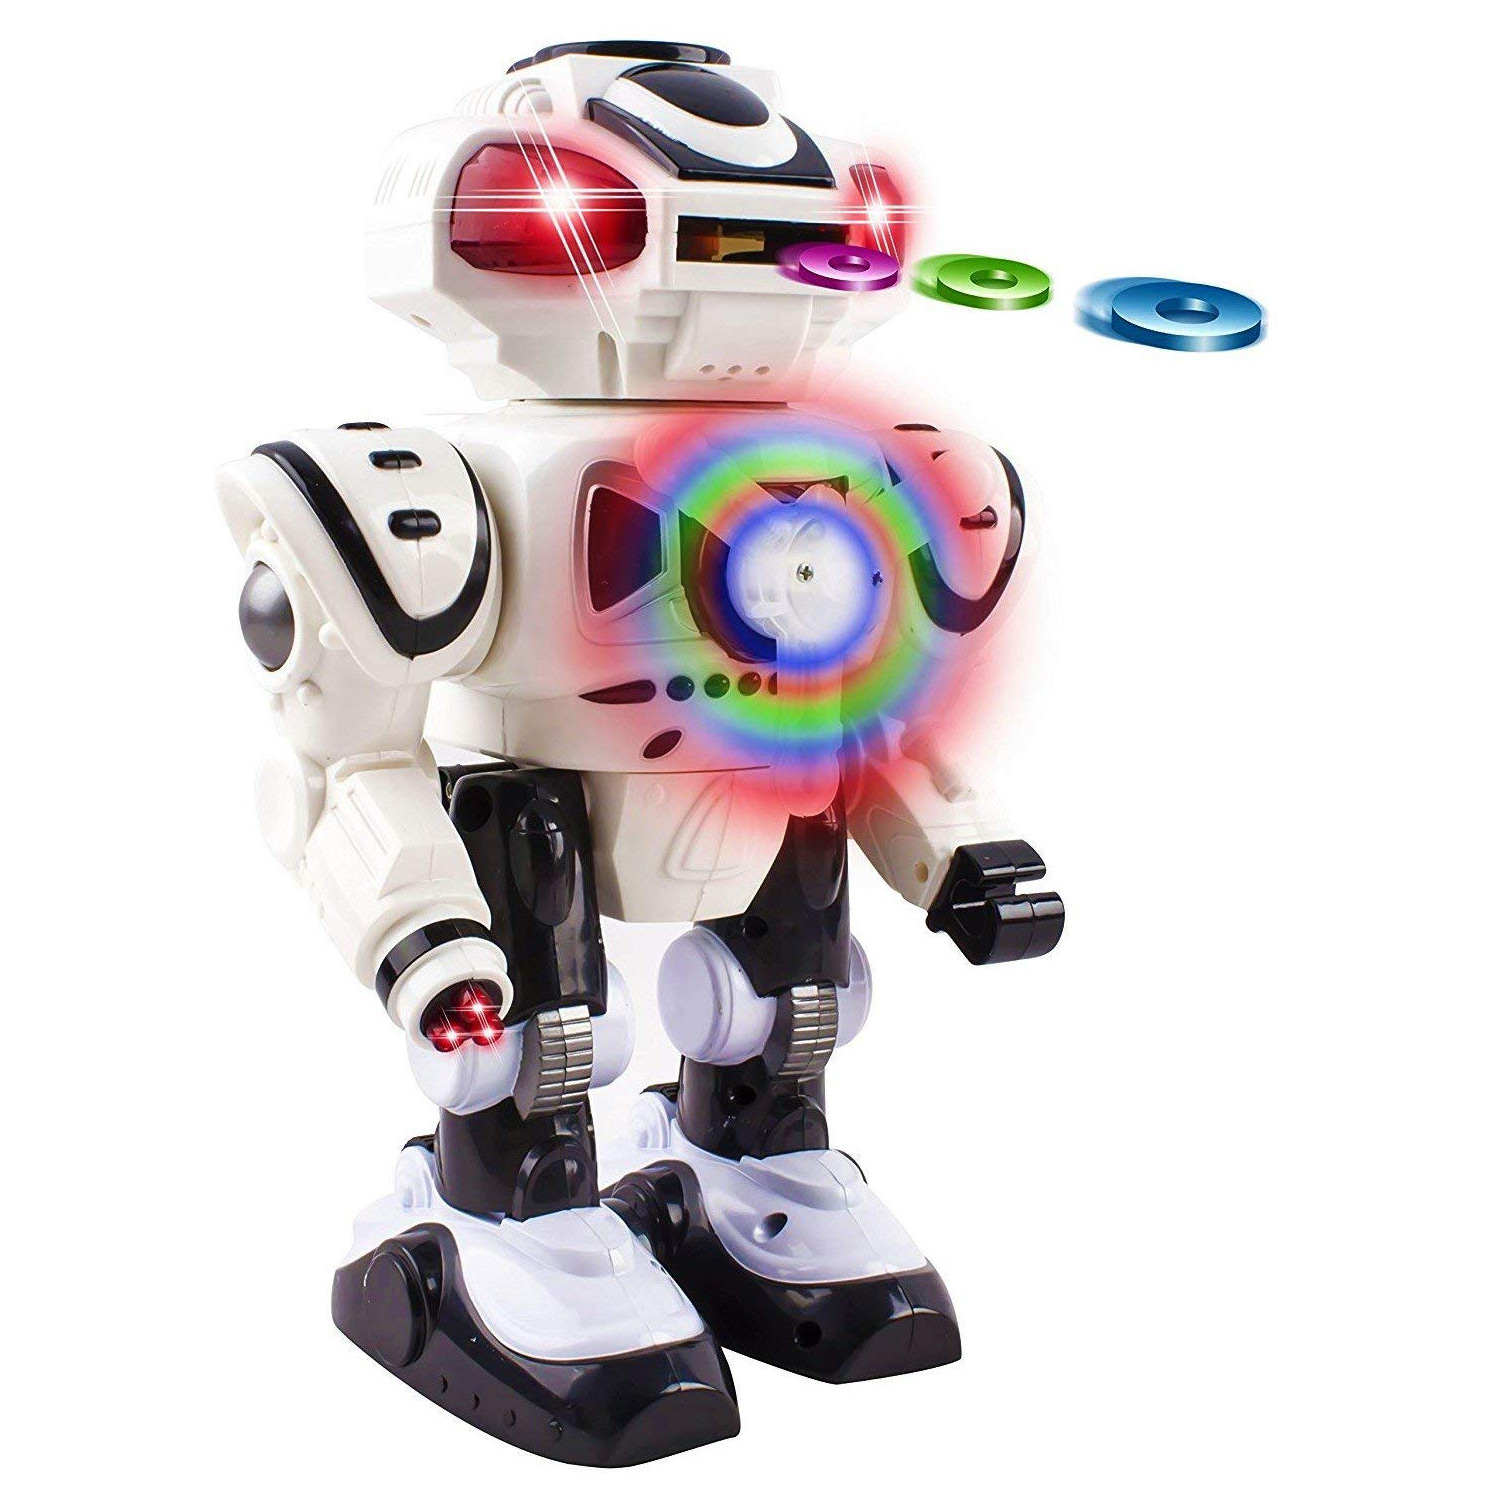 Super Android Toy Robot With Disc Shooting Walking Flashing Lights And Sound Features Great Action Toy For Kids Boys Girls Toddlers Battery Operated White